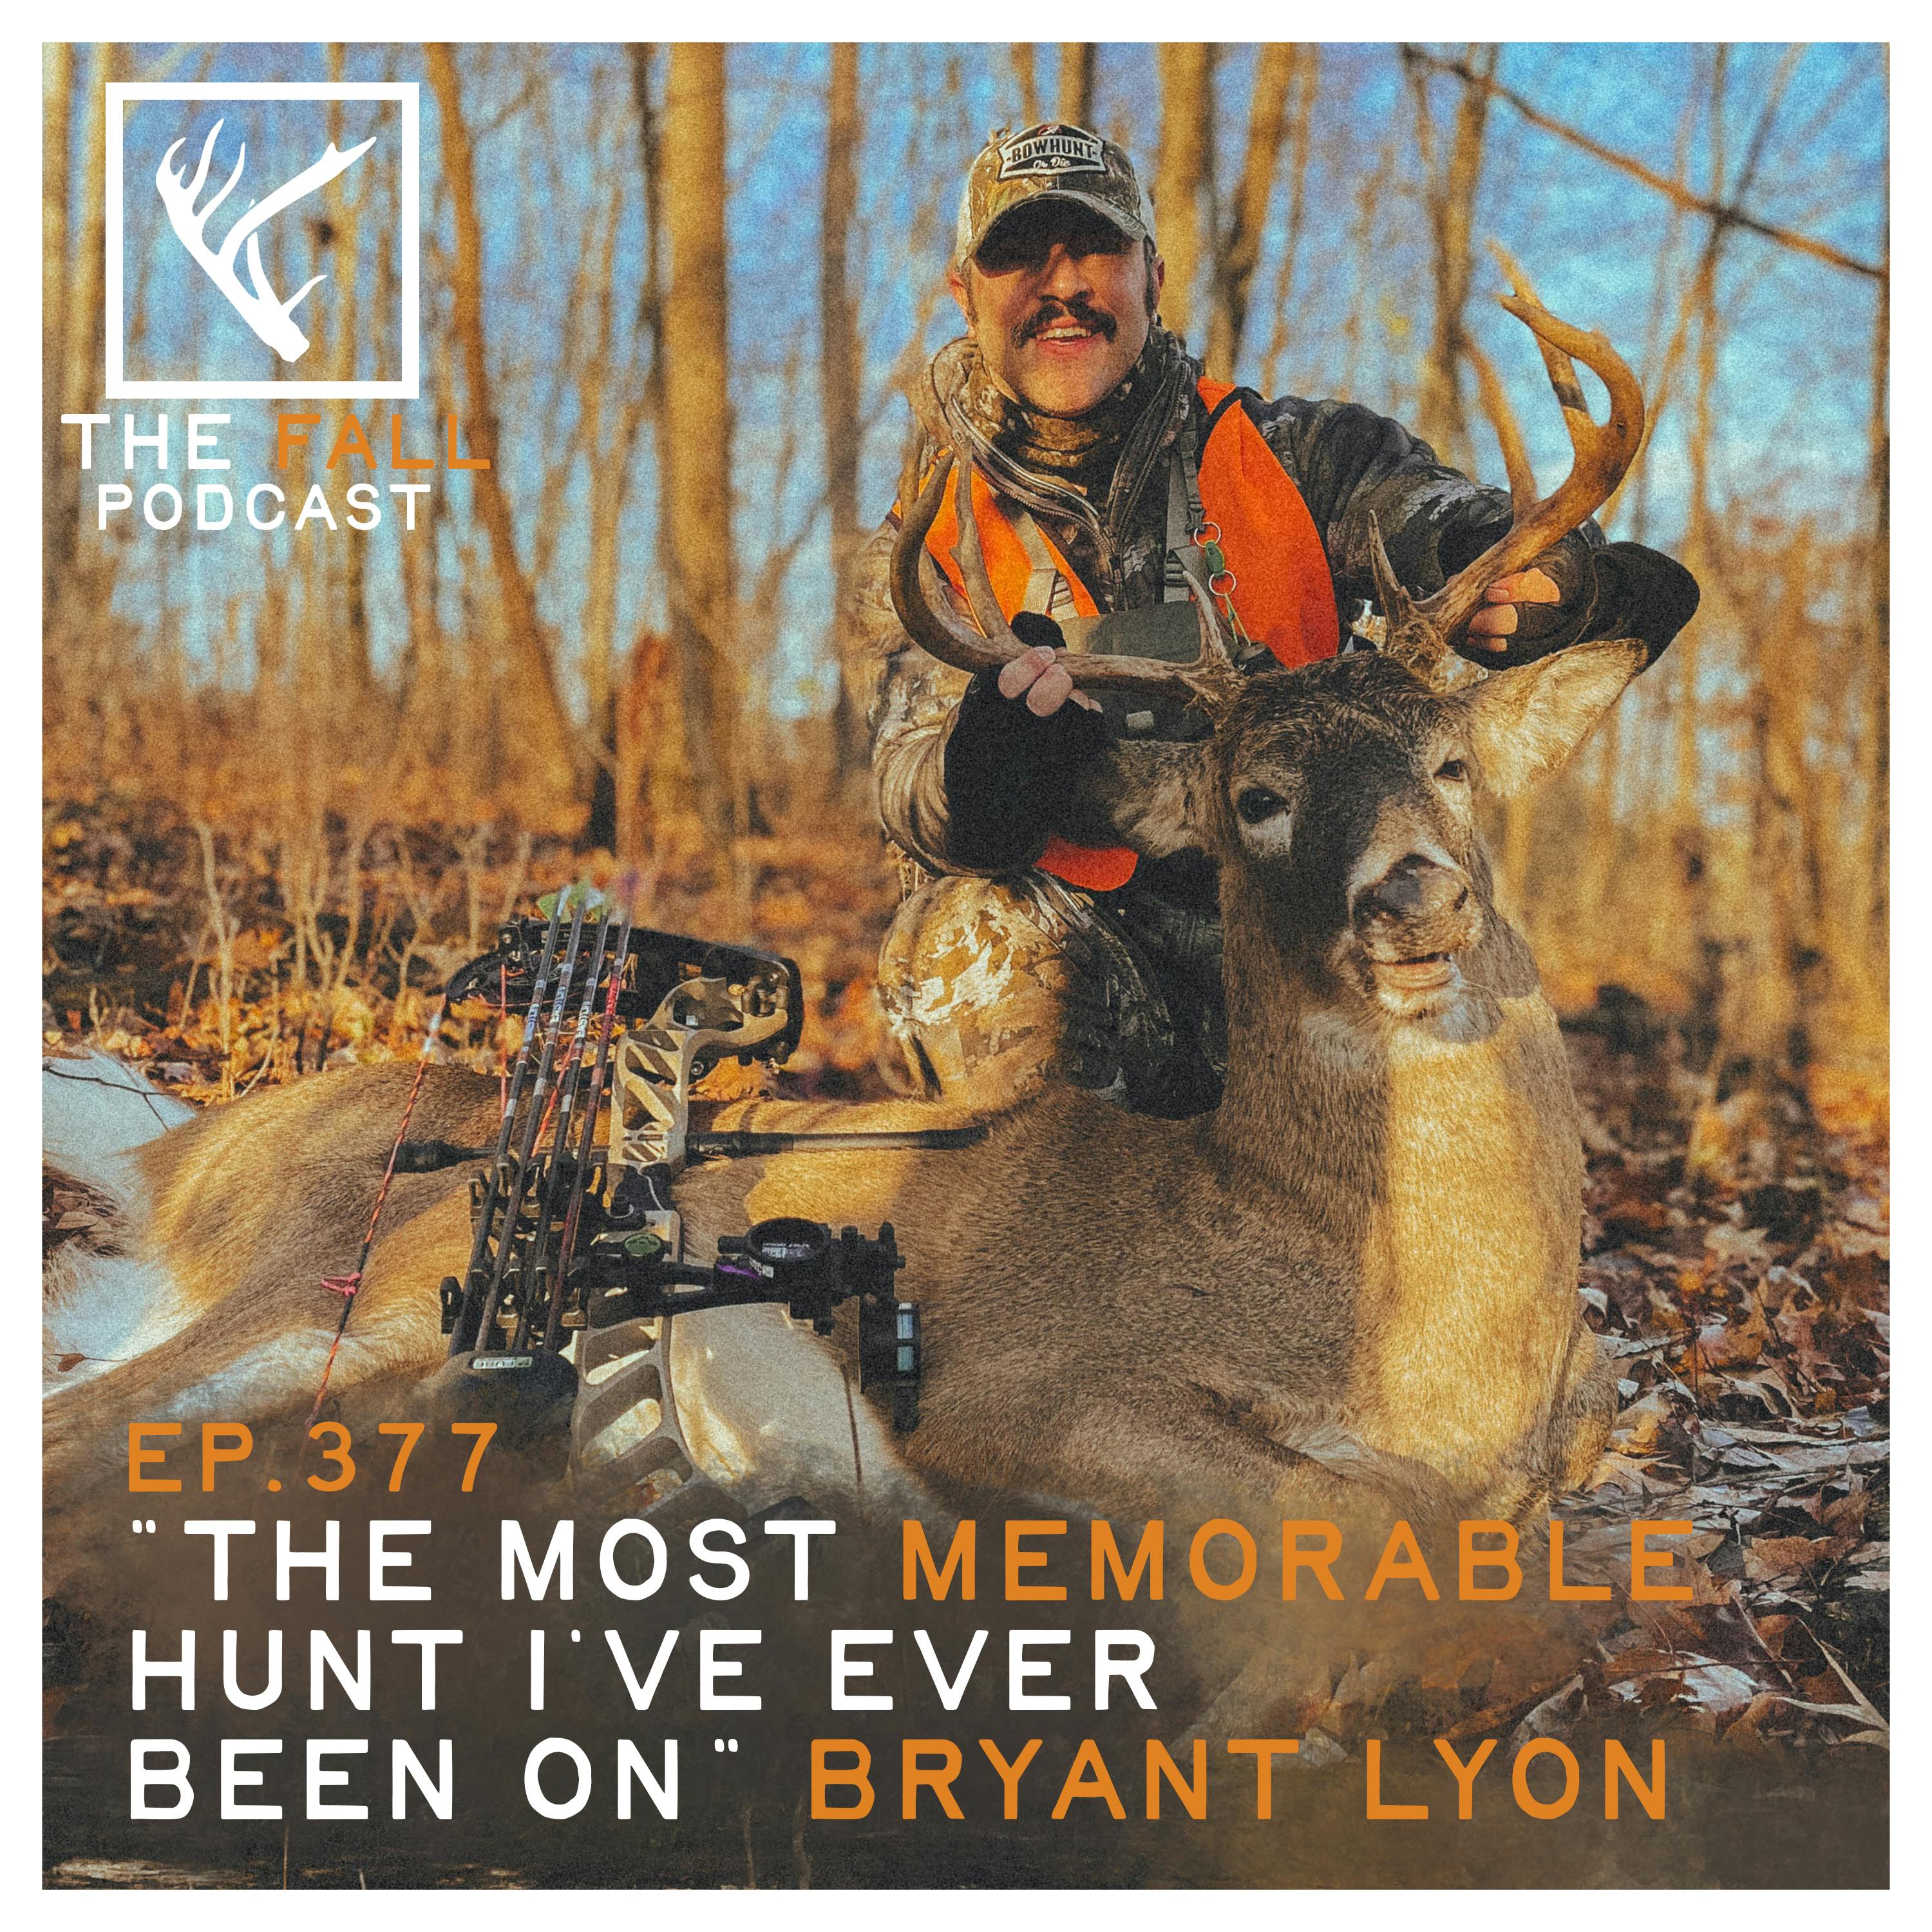 EP 377 | ”The most memorable hunt I’ve ever been on” Bryant Lyon